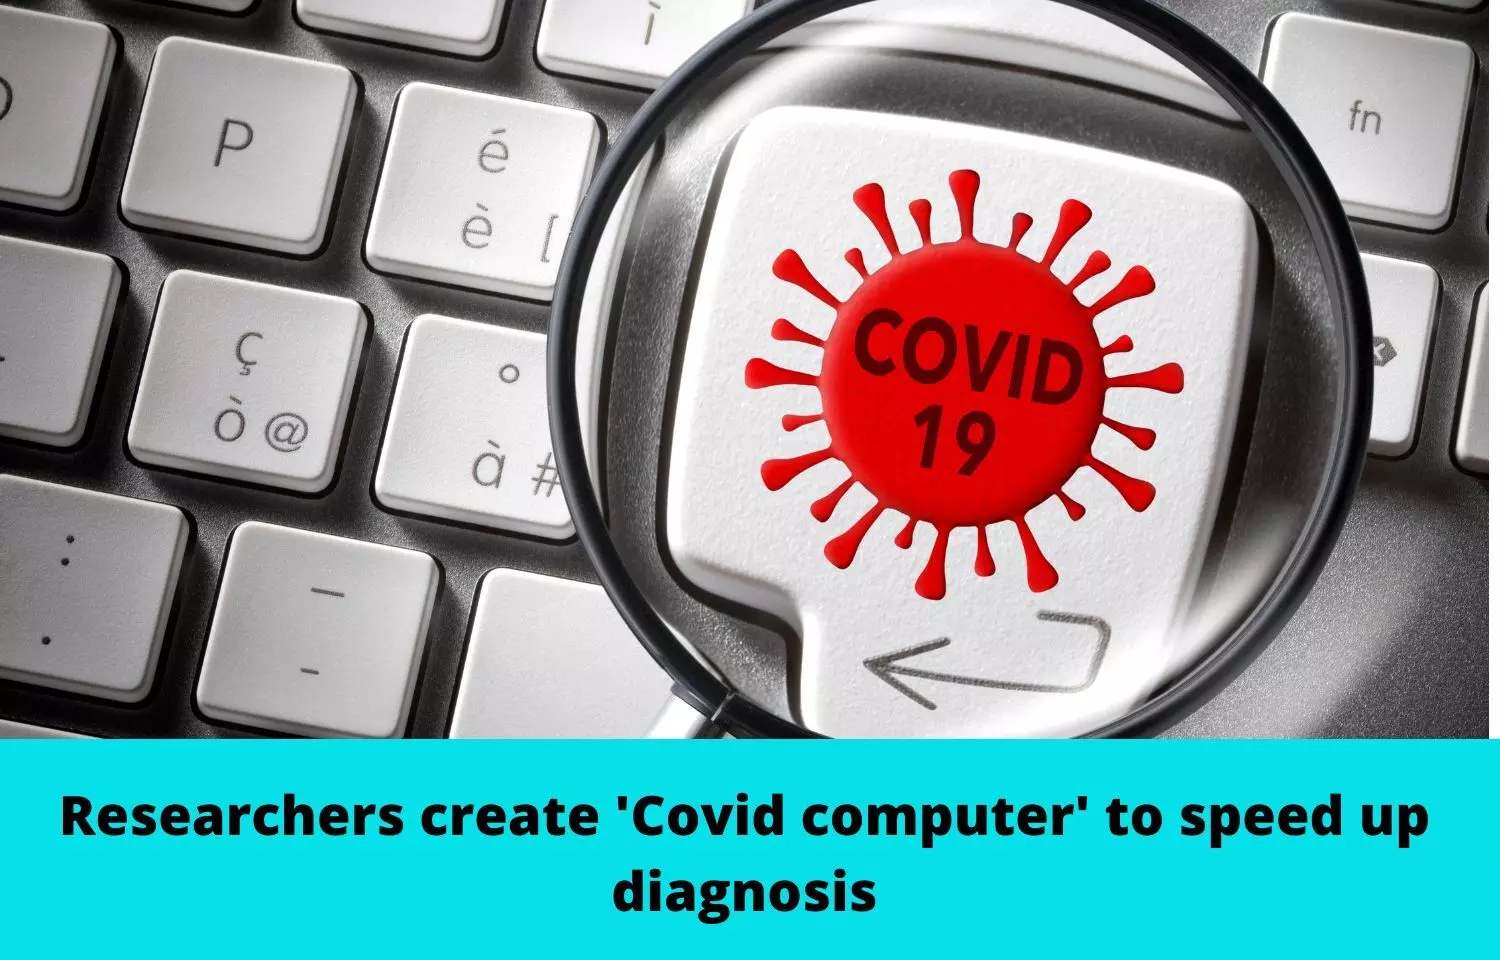 Researchers create Covid computer to speed up diagnosis